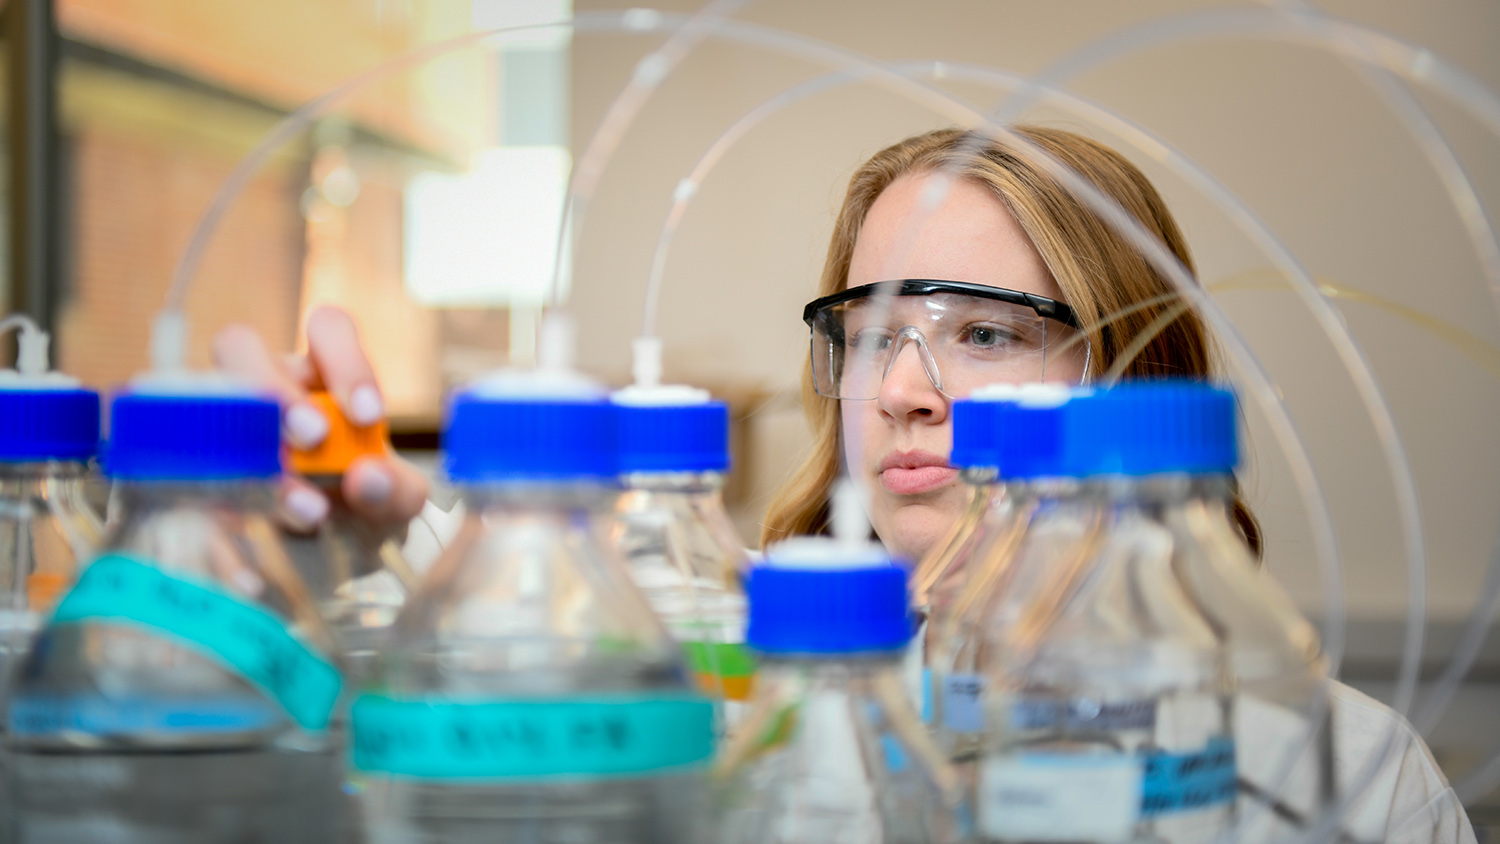 Graduate student Kaylie Kirkwood works in the Pierce lab, with bottles and tubes in the foreground